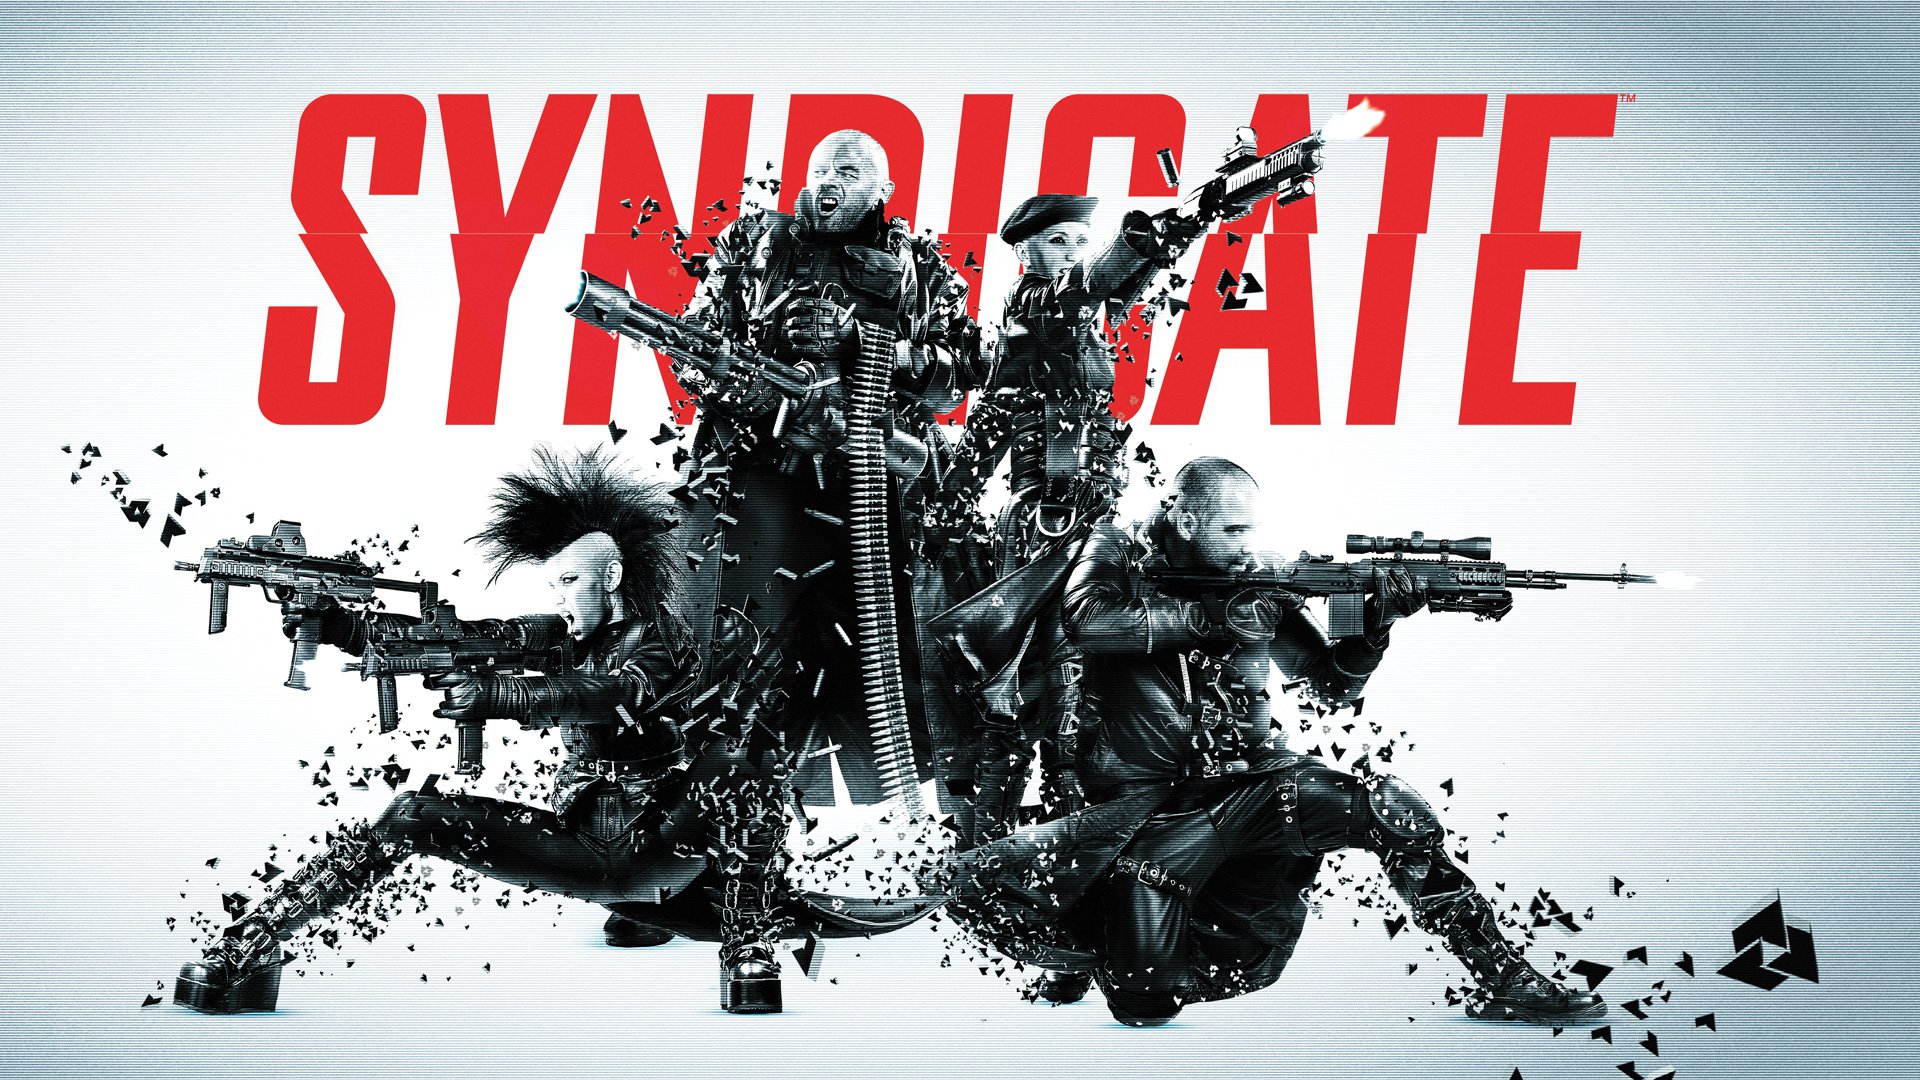 syndicate pc game crack download